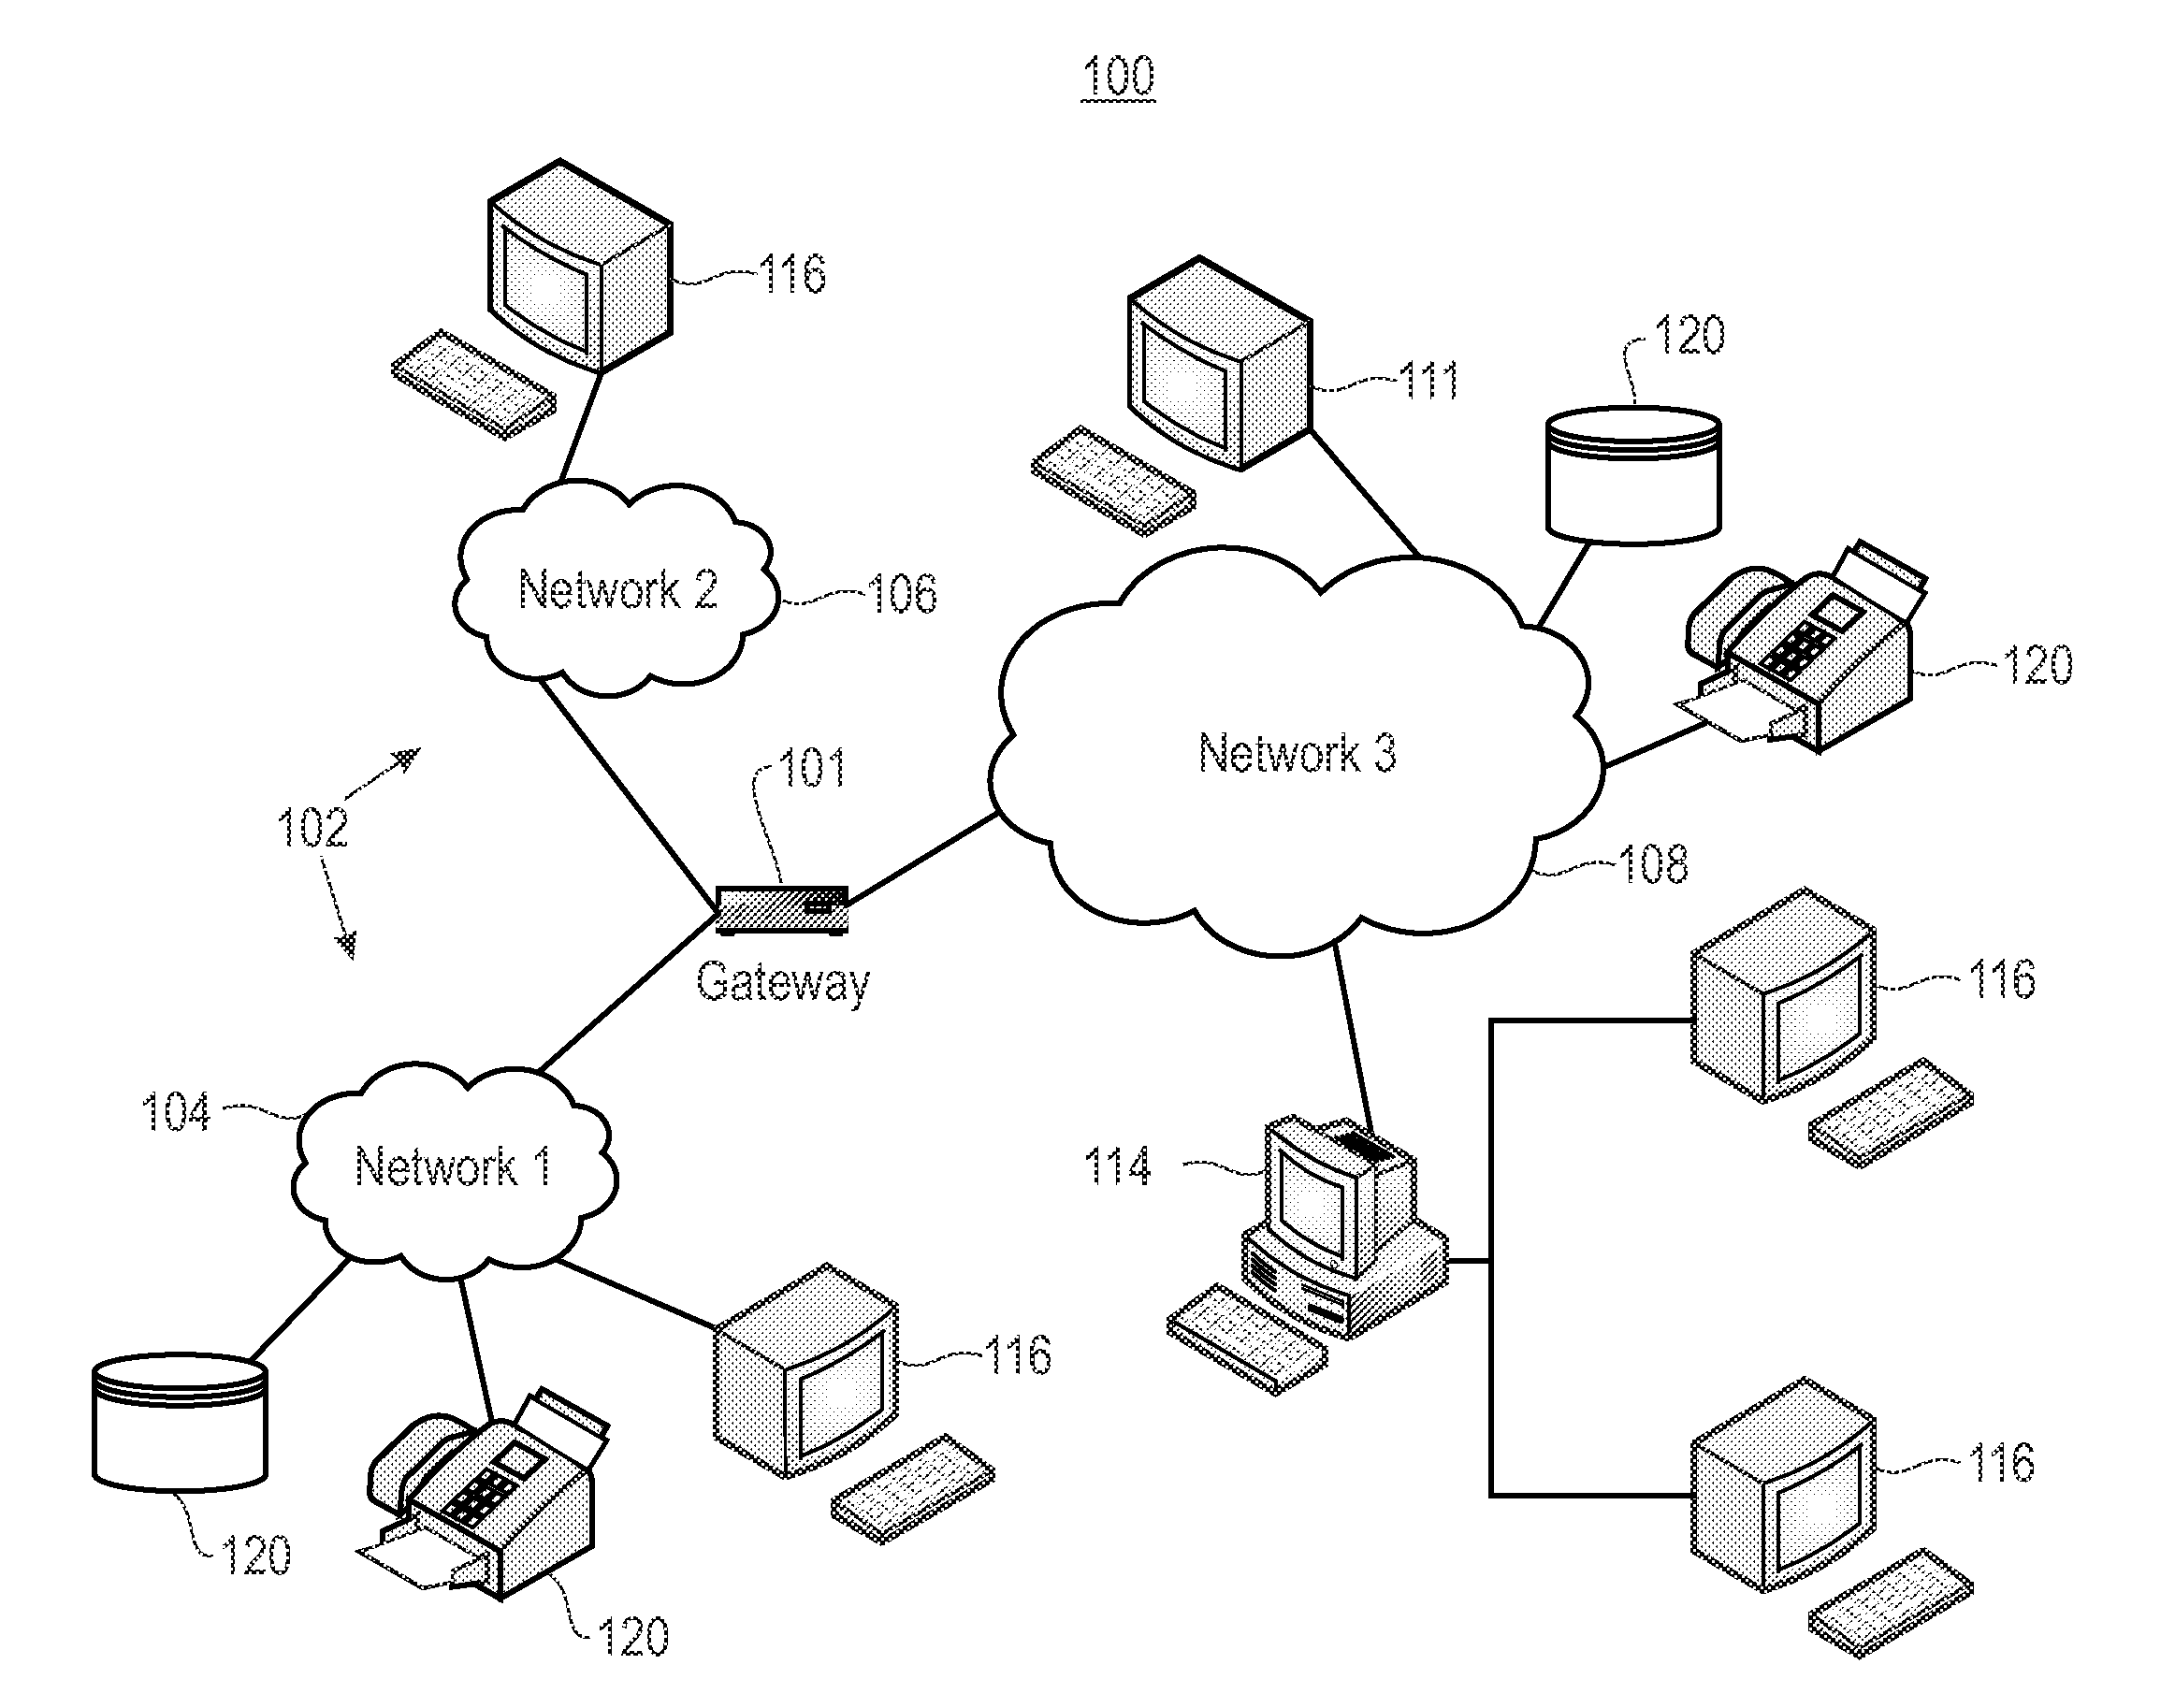 Quick initialization of data regions in a distributed storage system